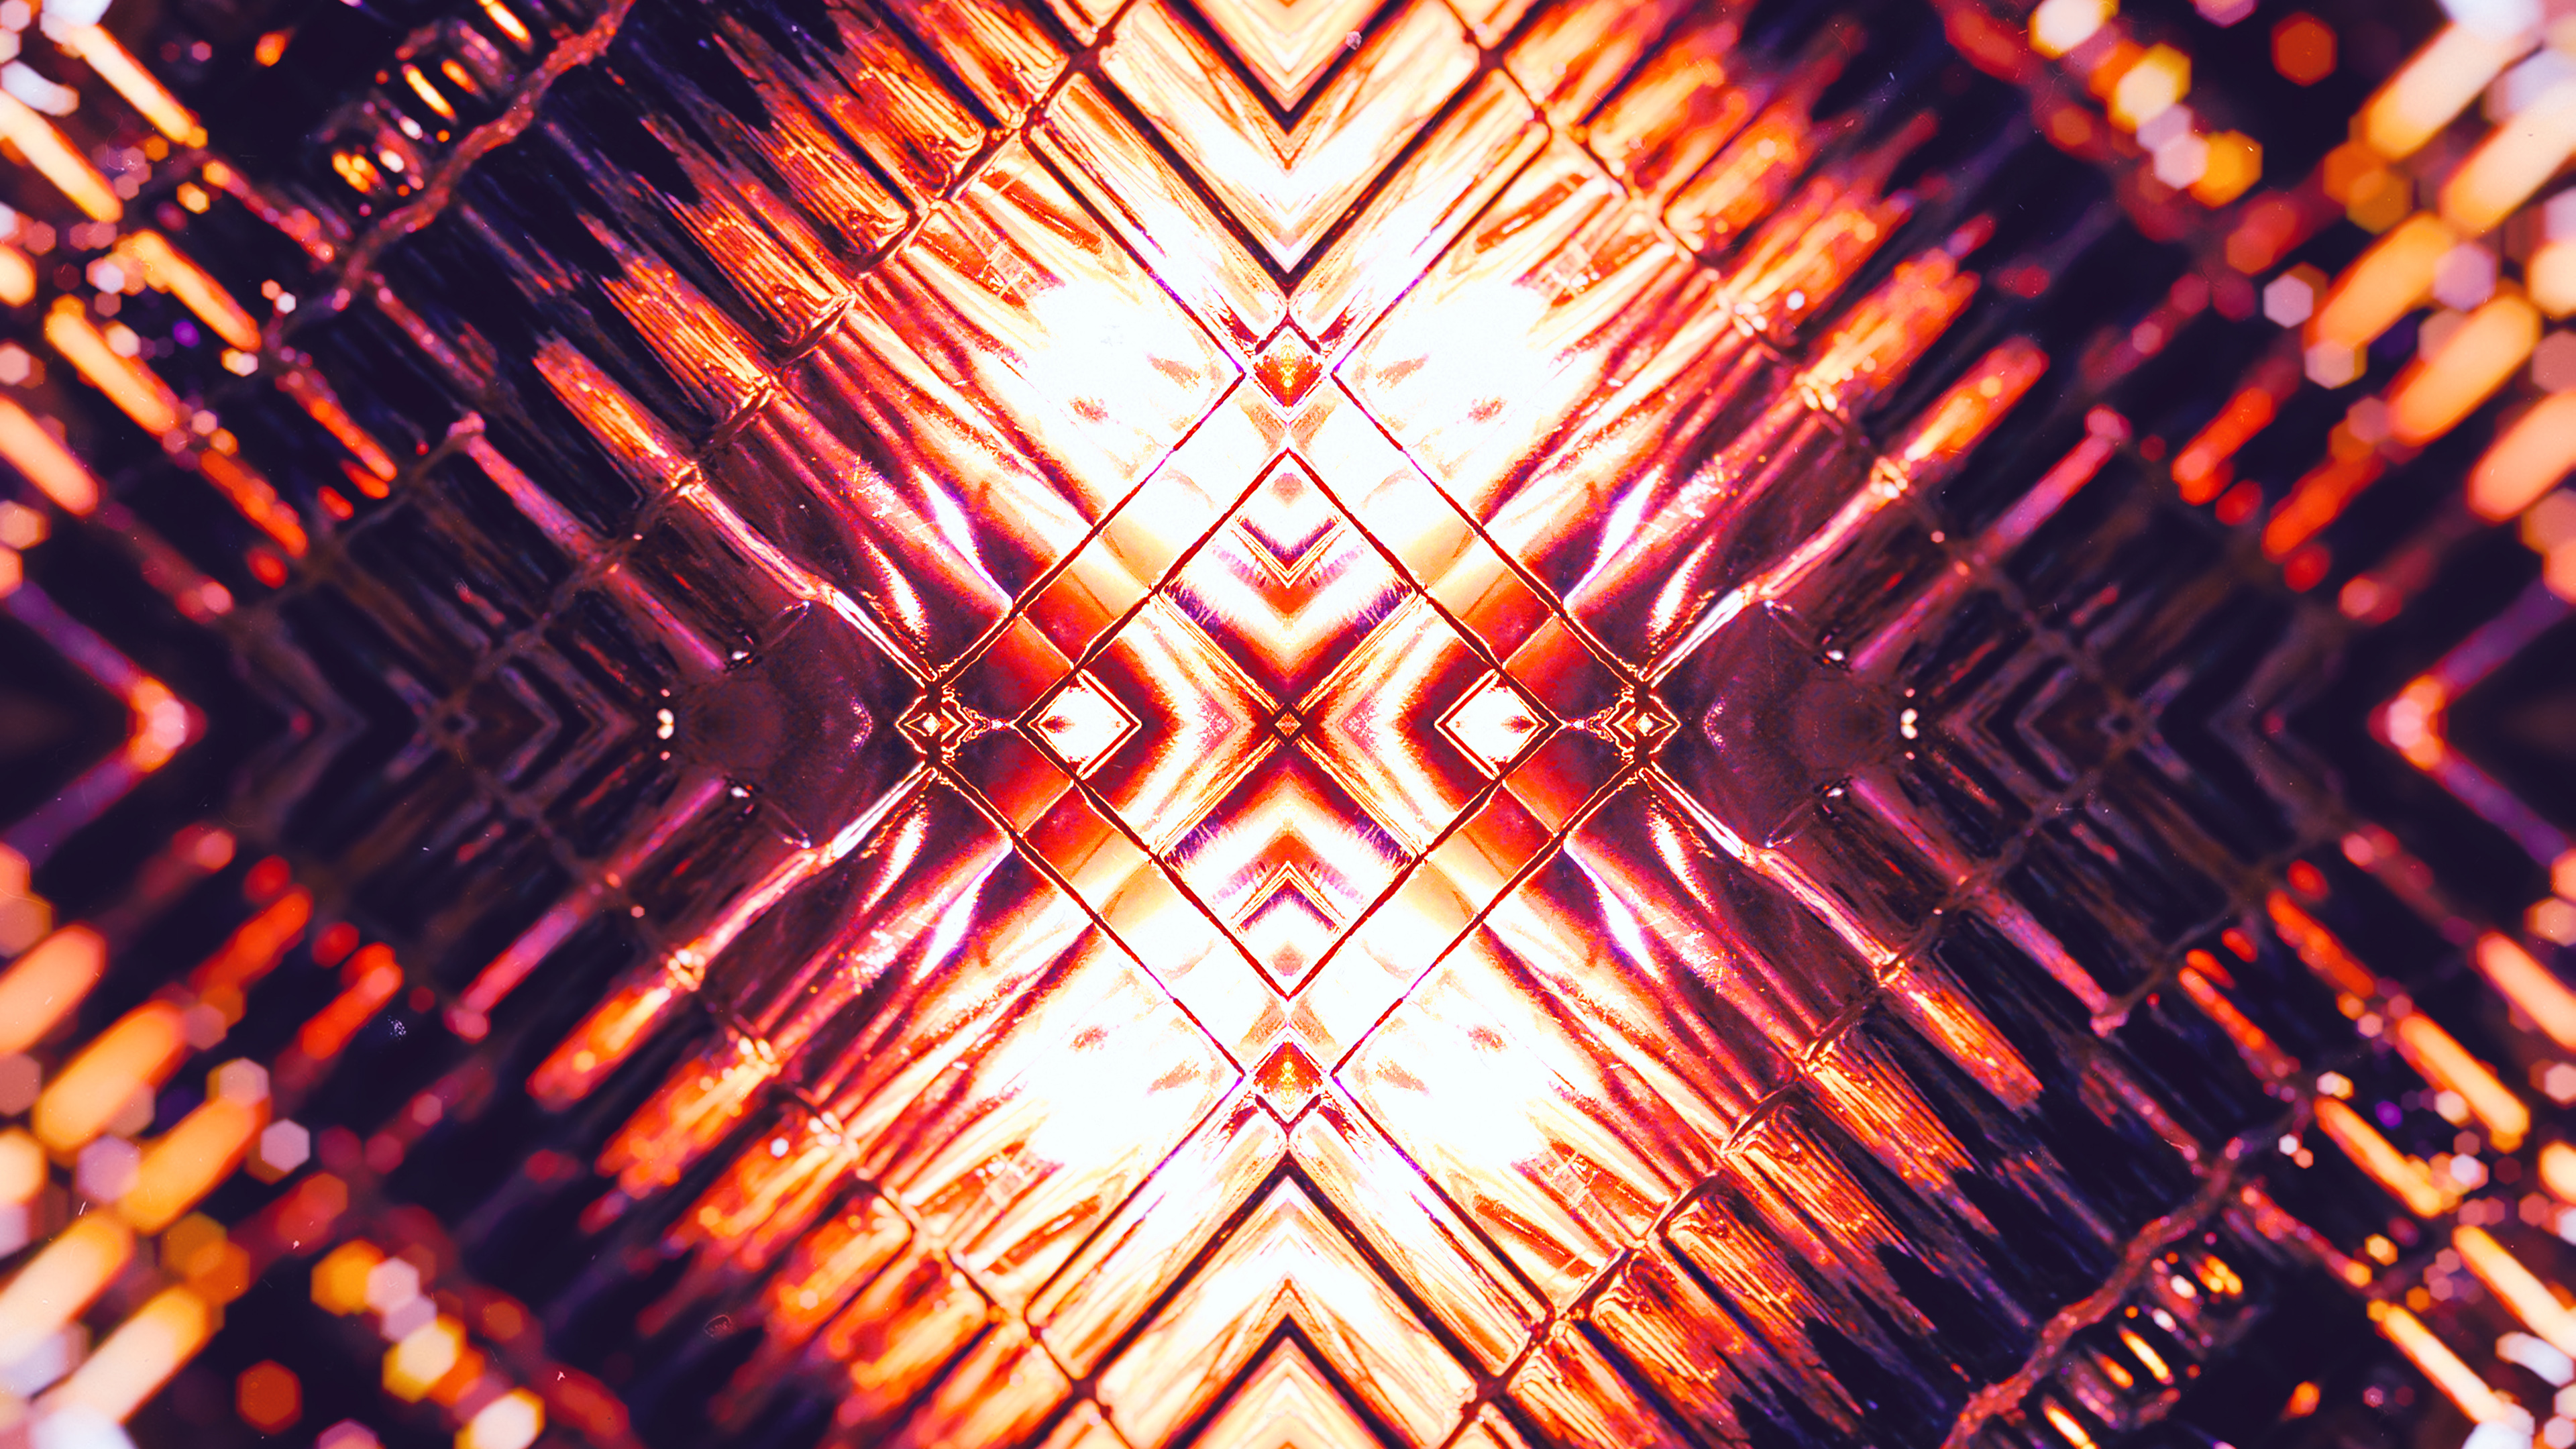 Abstract Symmetry 3840x2160